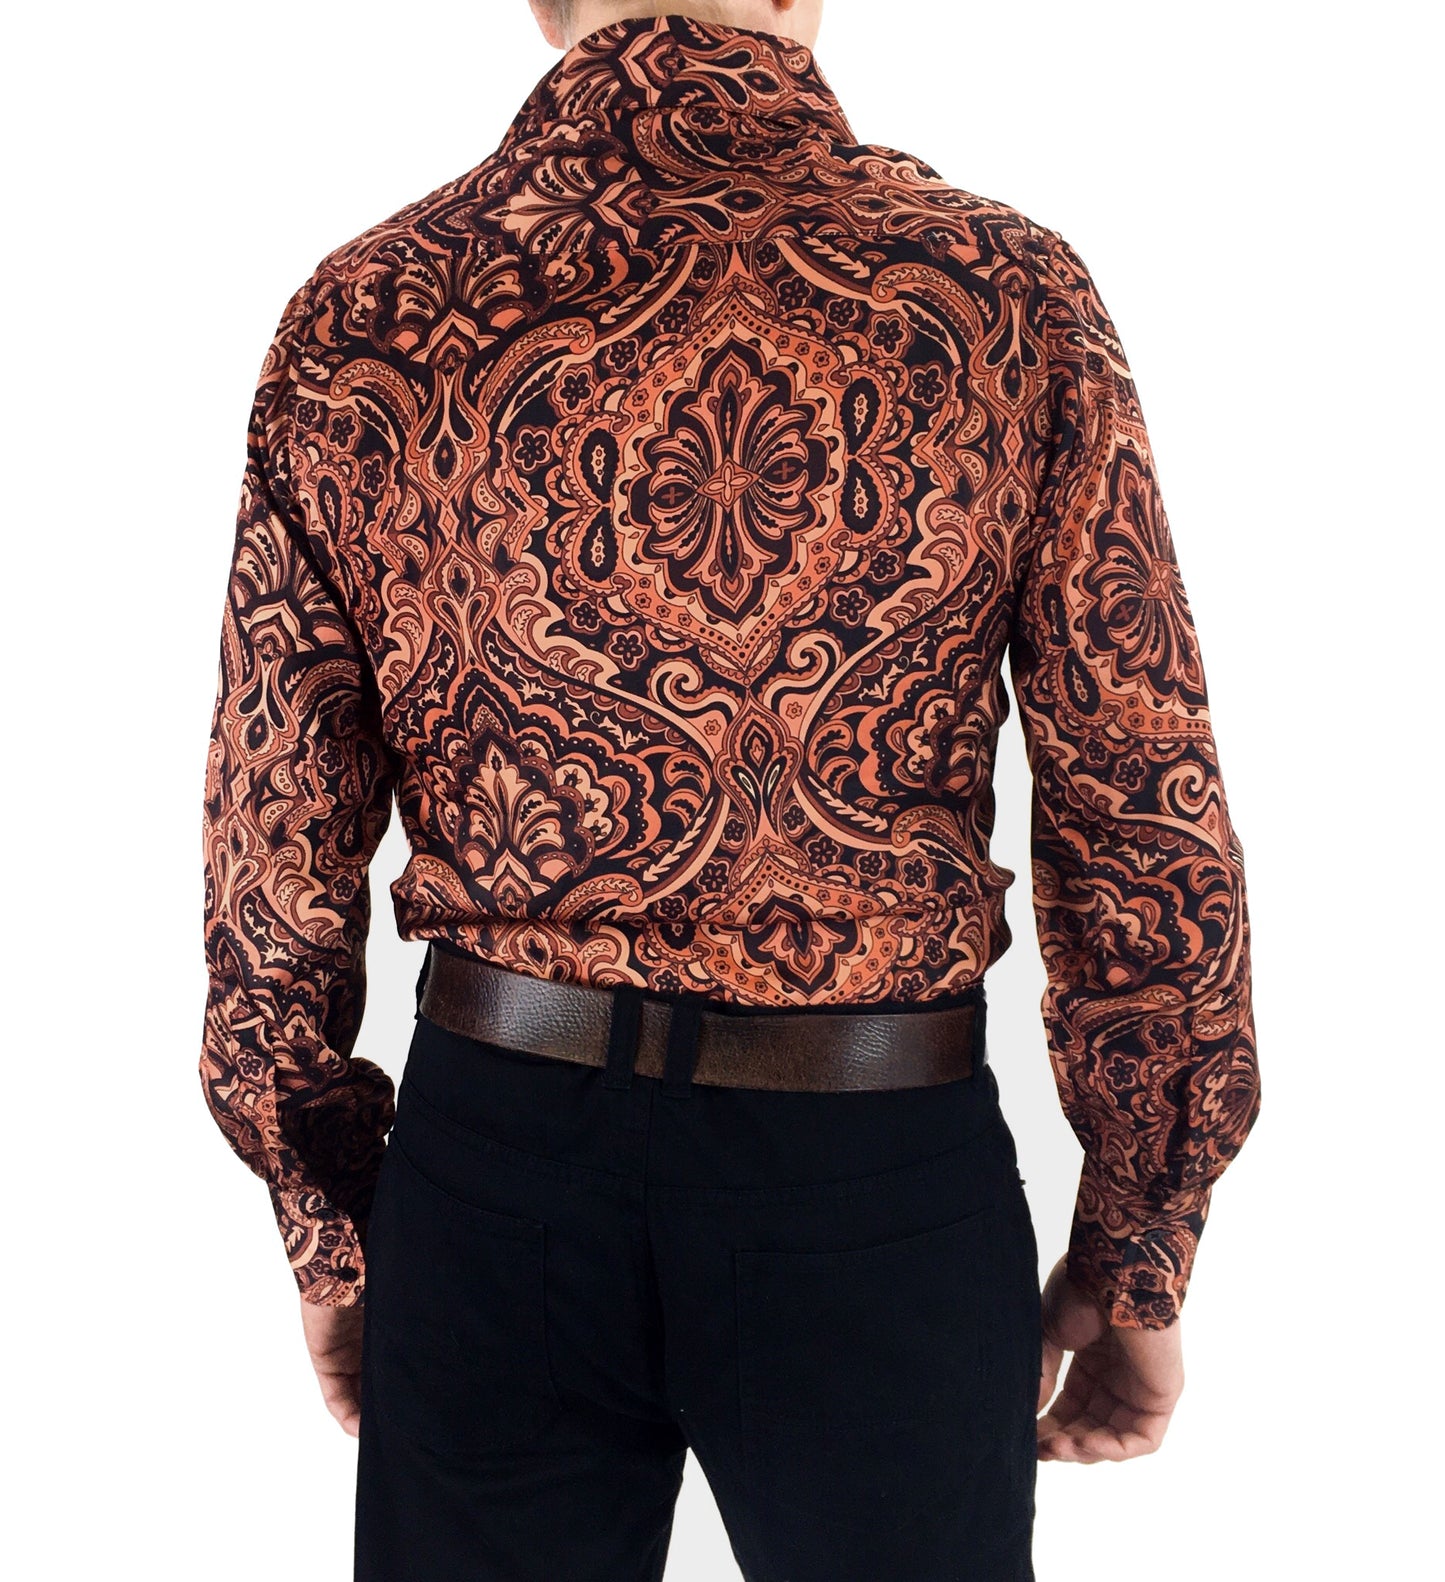 Mens Psychedelic Satin Shirt in Whiskey